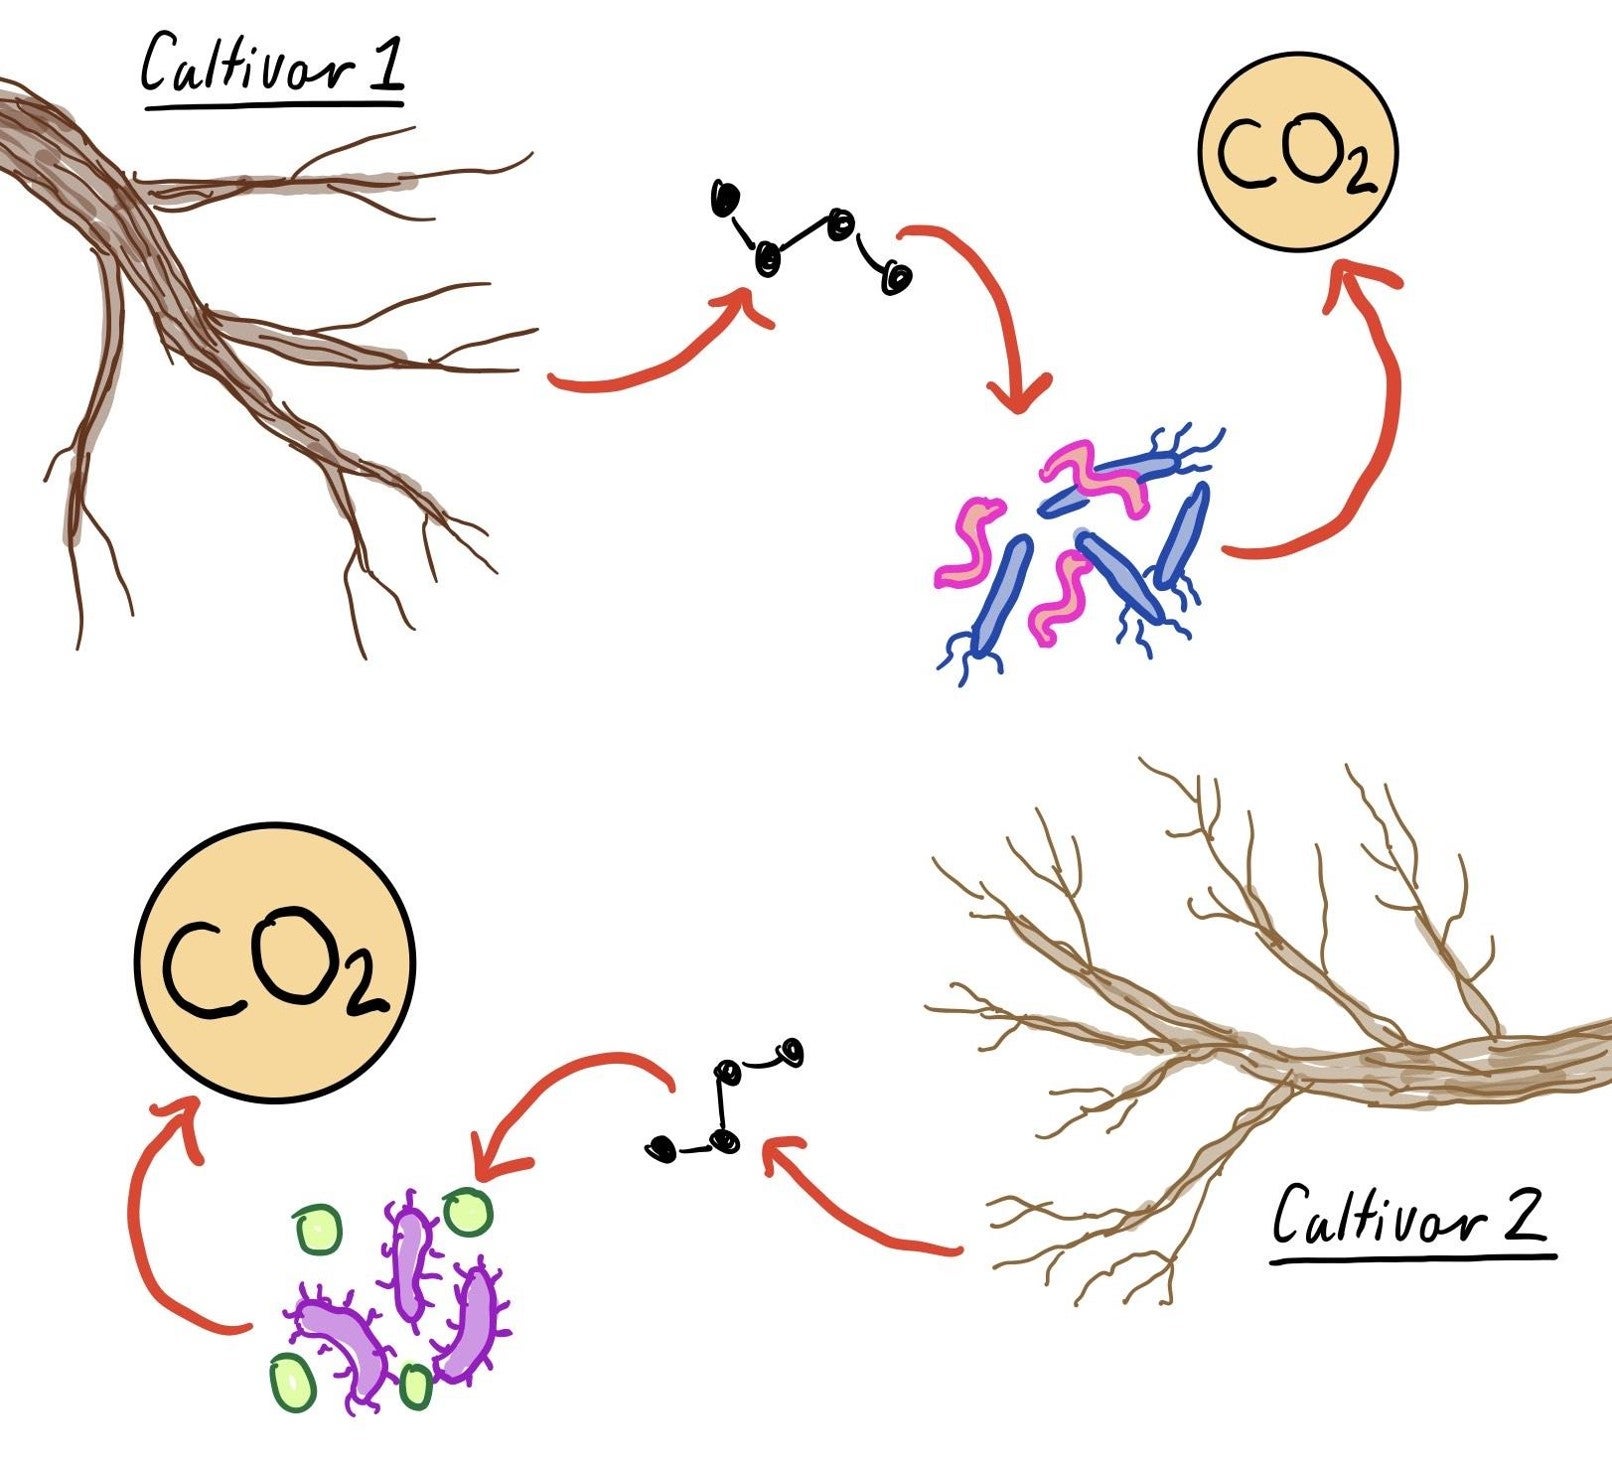 Infographic of process: Cultivar 1 leads to lower CO2 output than Cultivar 2